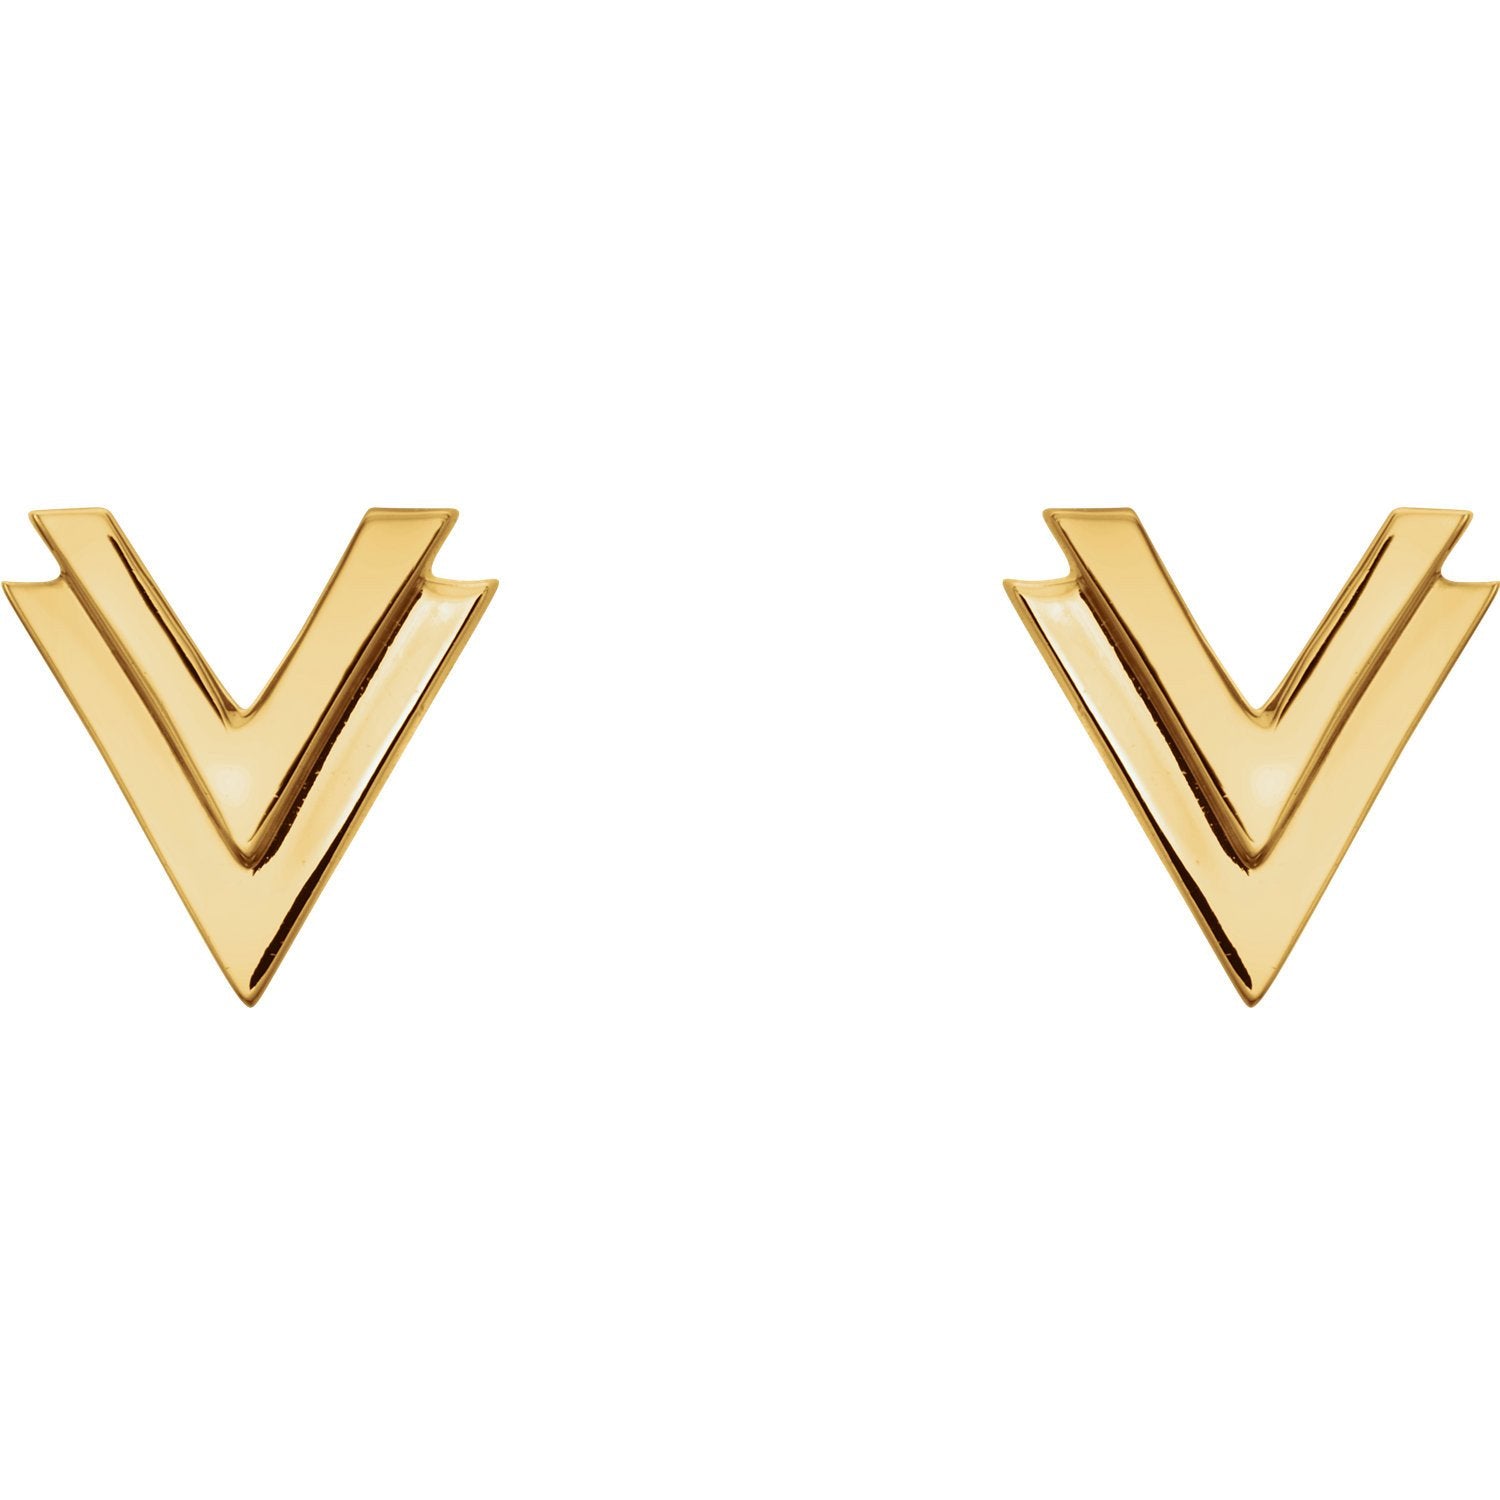 Small Double "V" Chevron Earrings - 14k Gold (Y, W or R), Platinum or Sterling Silver